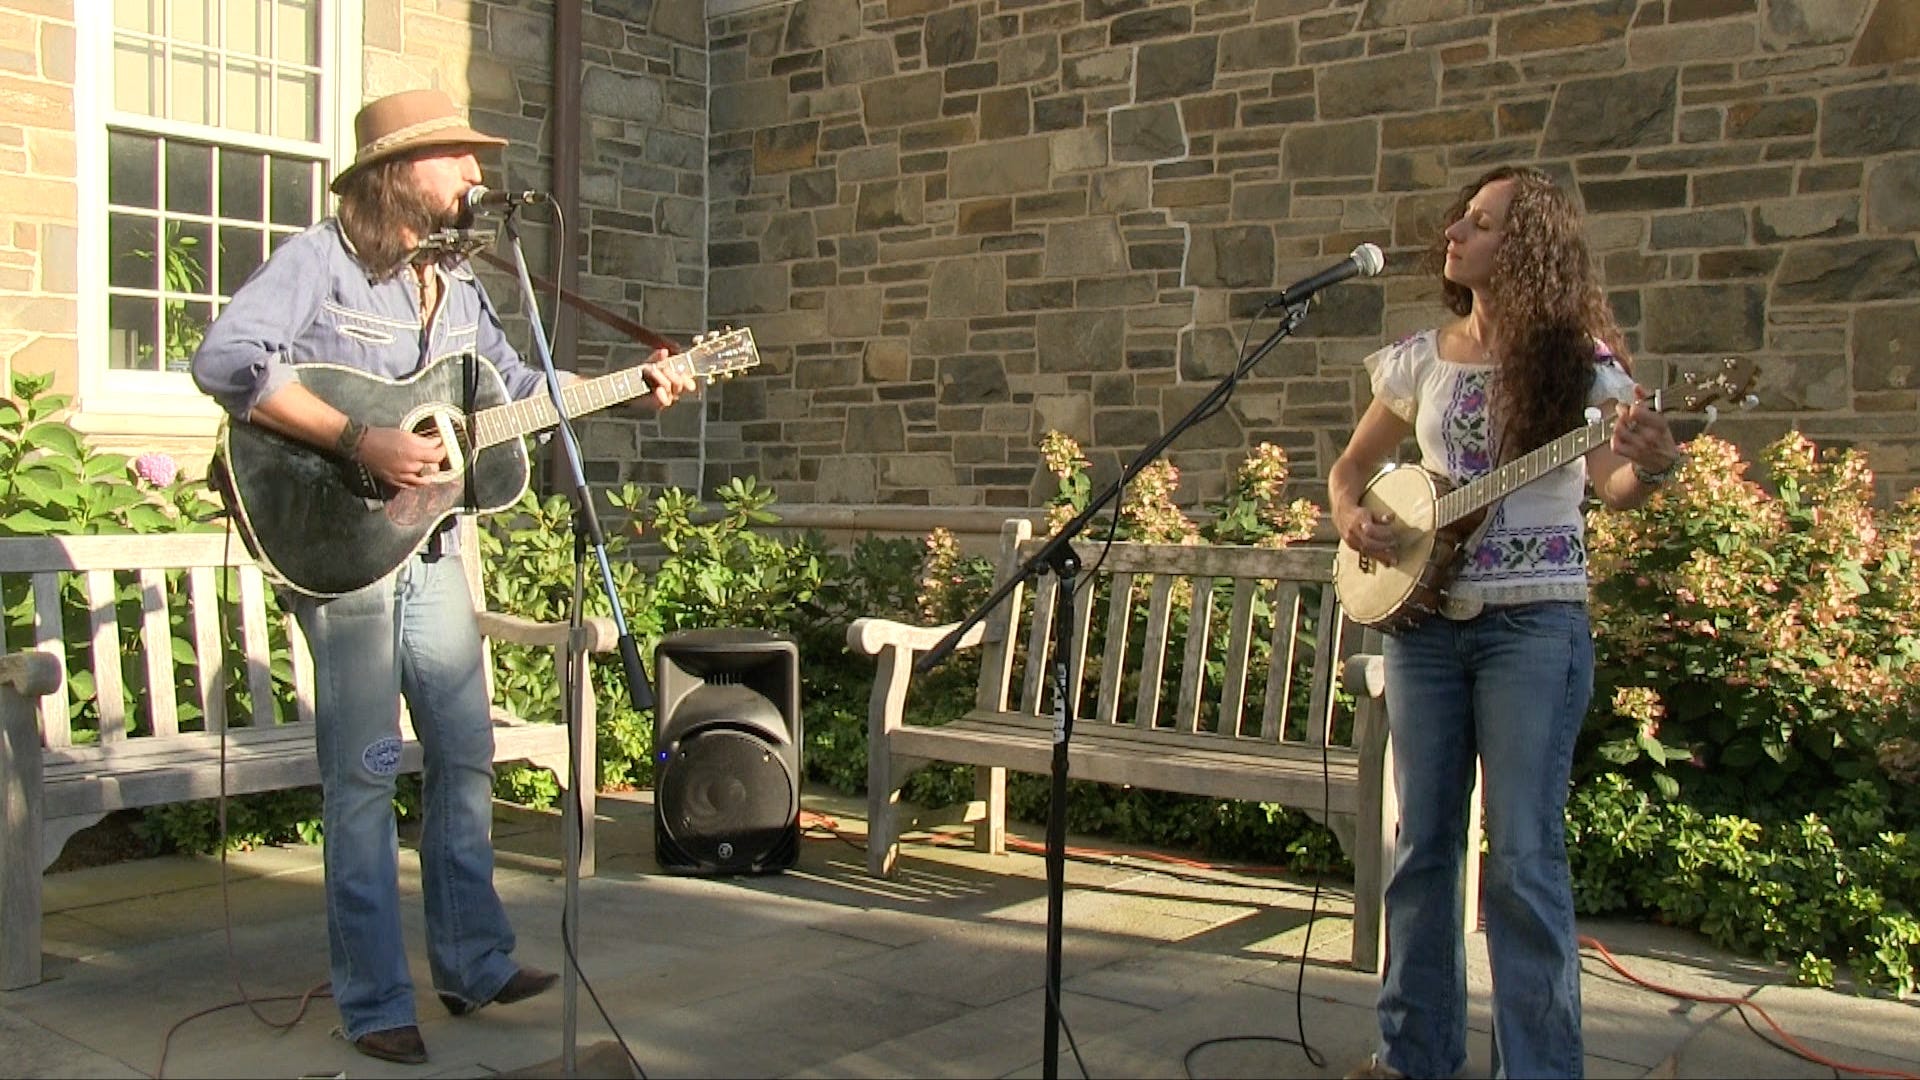 Poughkeepsie Journal Patio Sessions David Kraai and Amy Laber